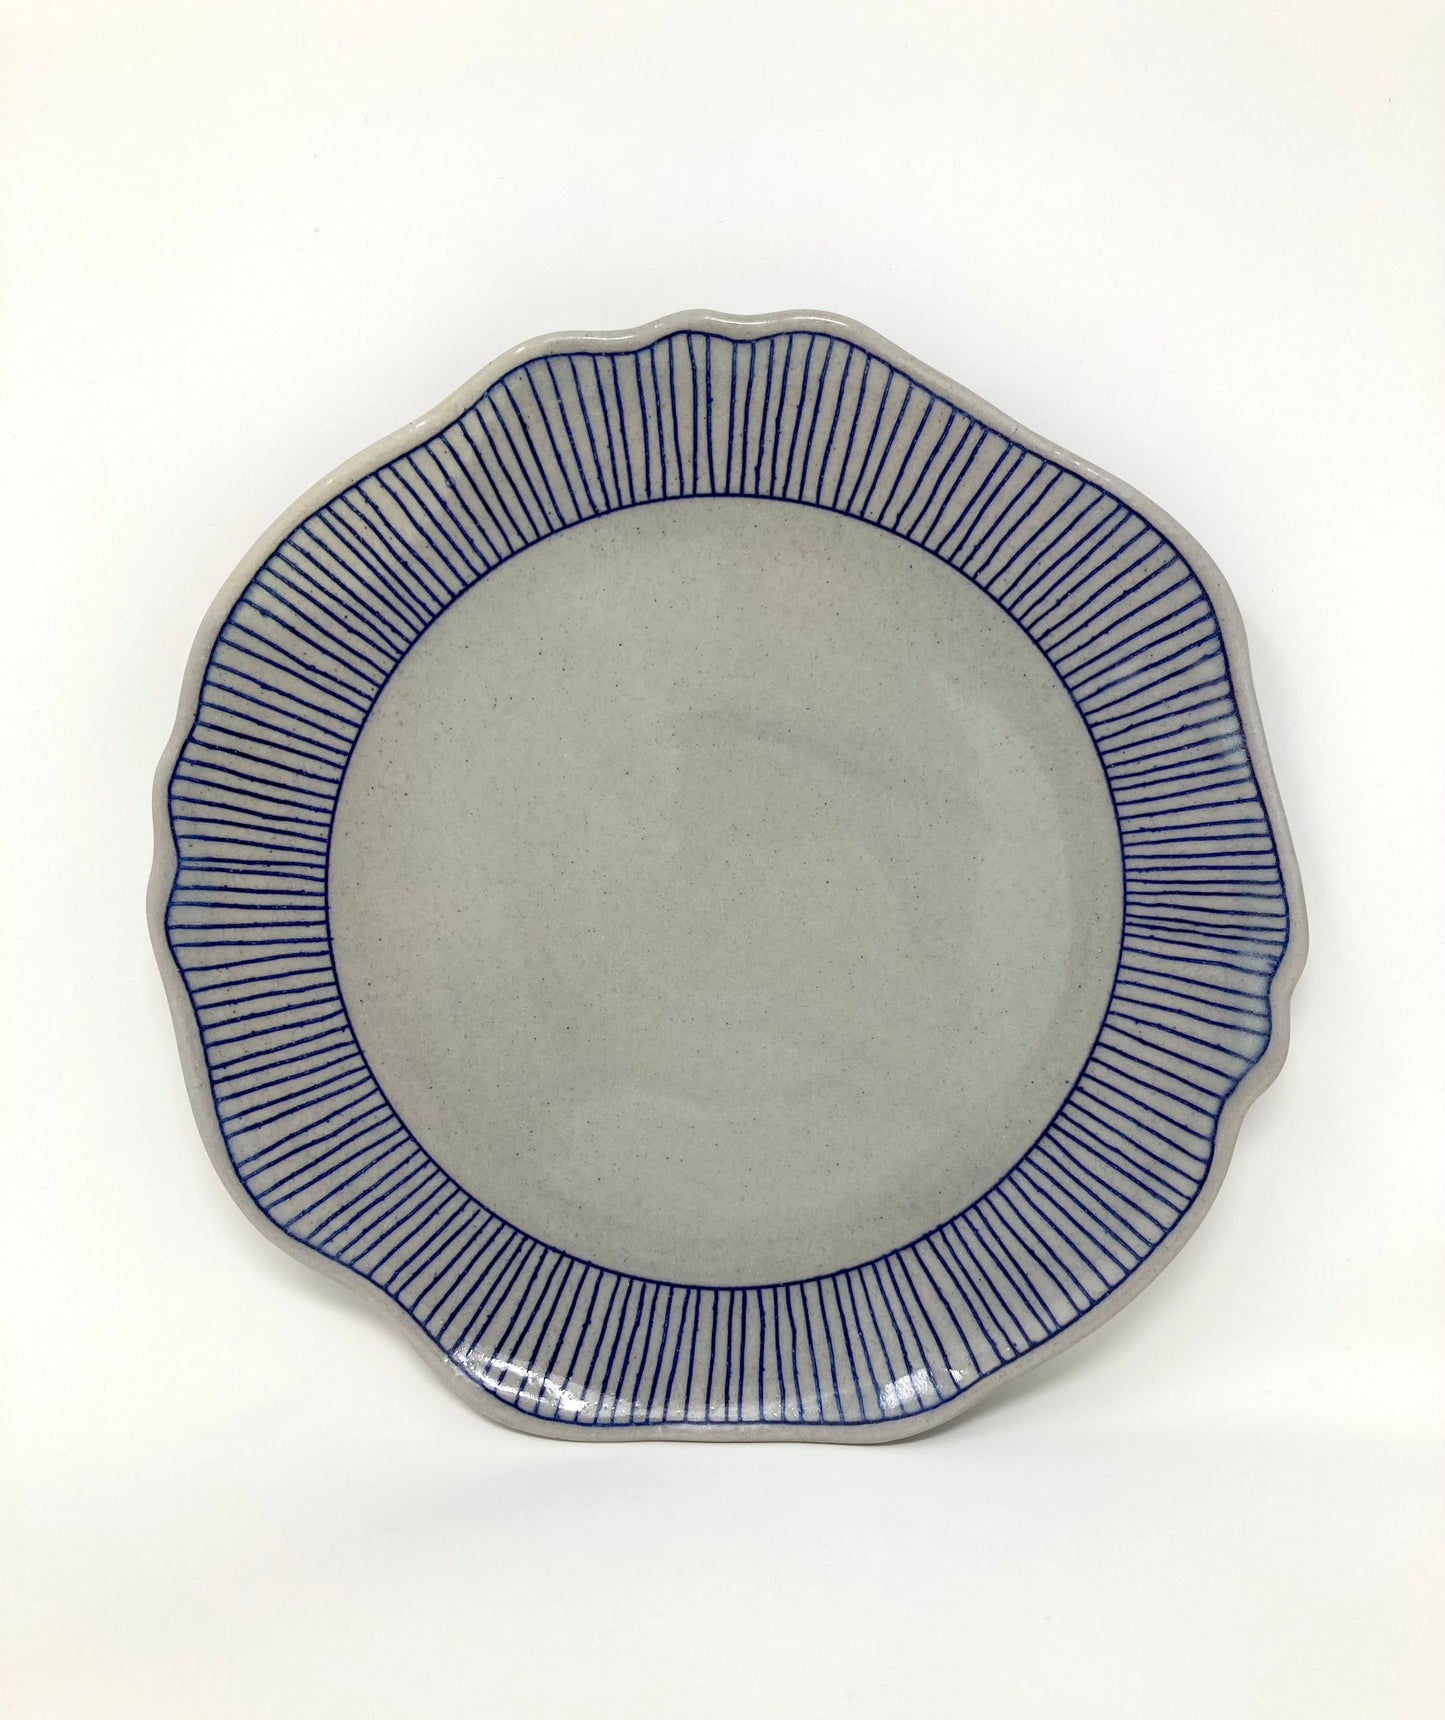 Striped Dinner Plate with Organic Rim in Blue and Gray